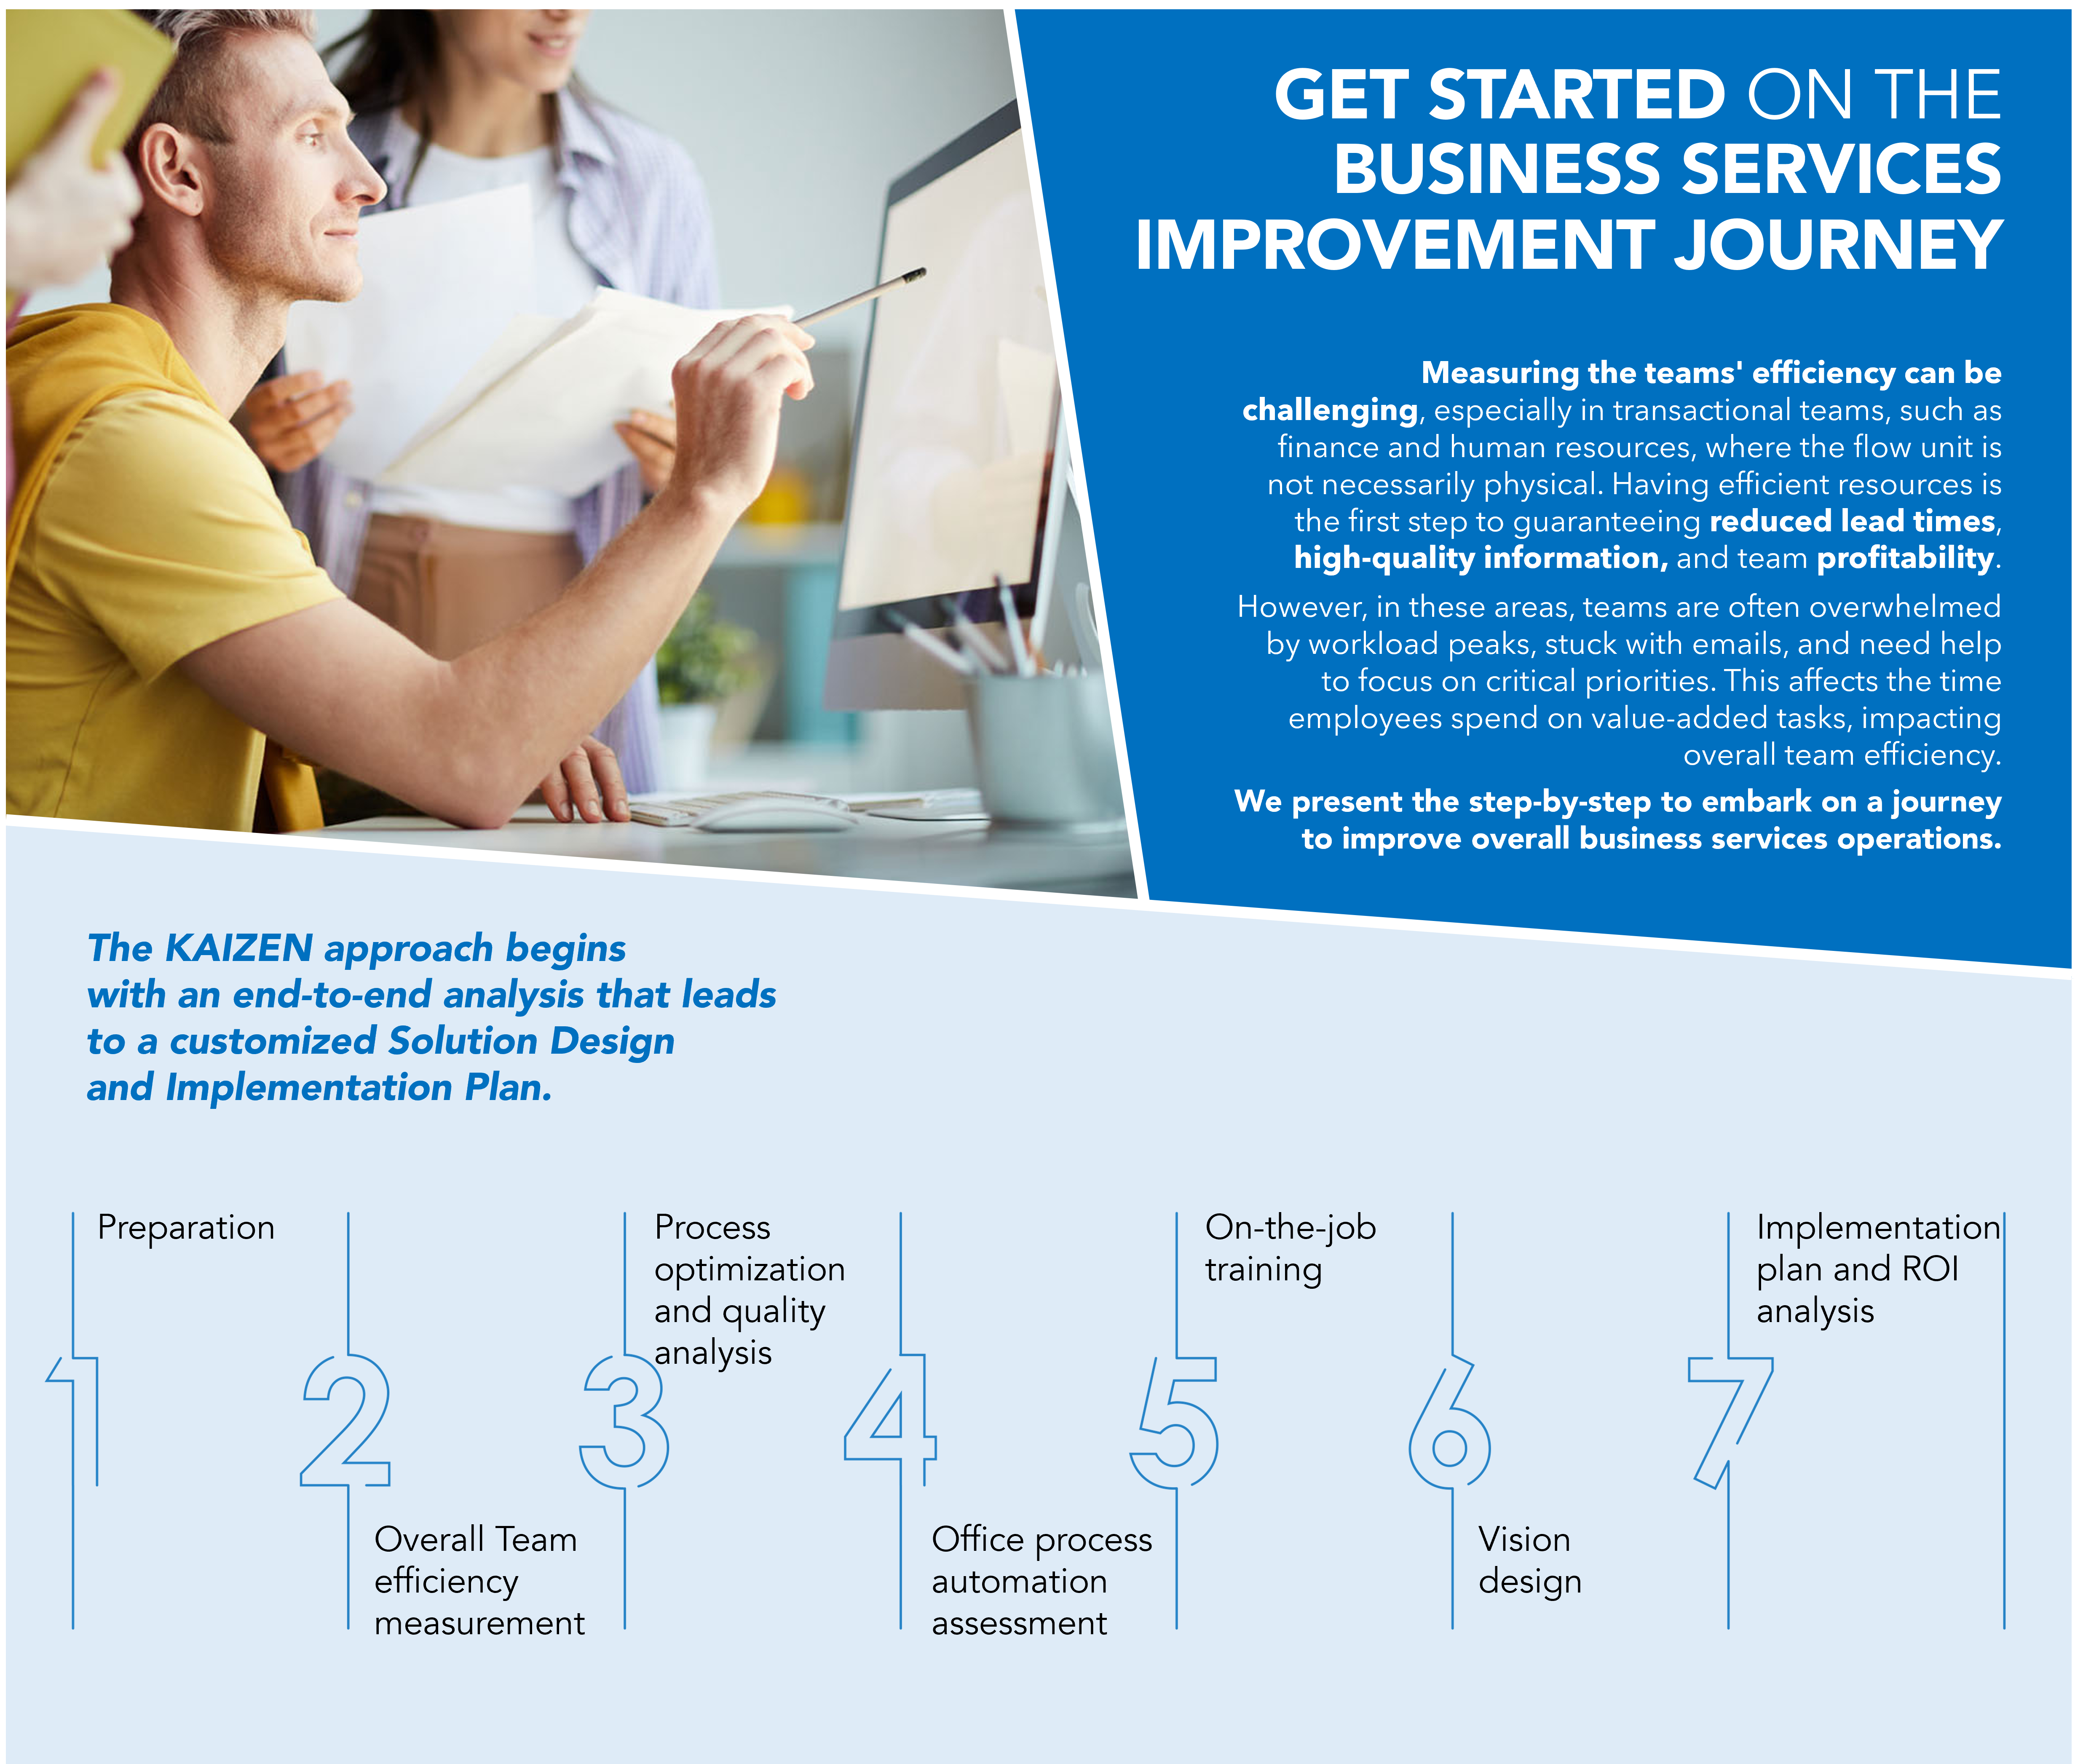 Getting started on a Business Services Improvement Journey